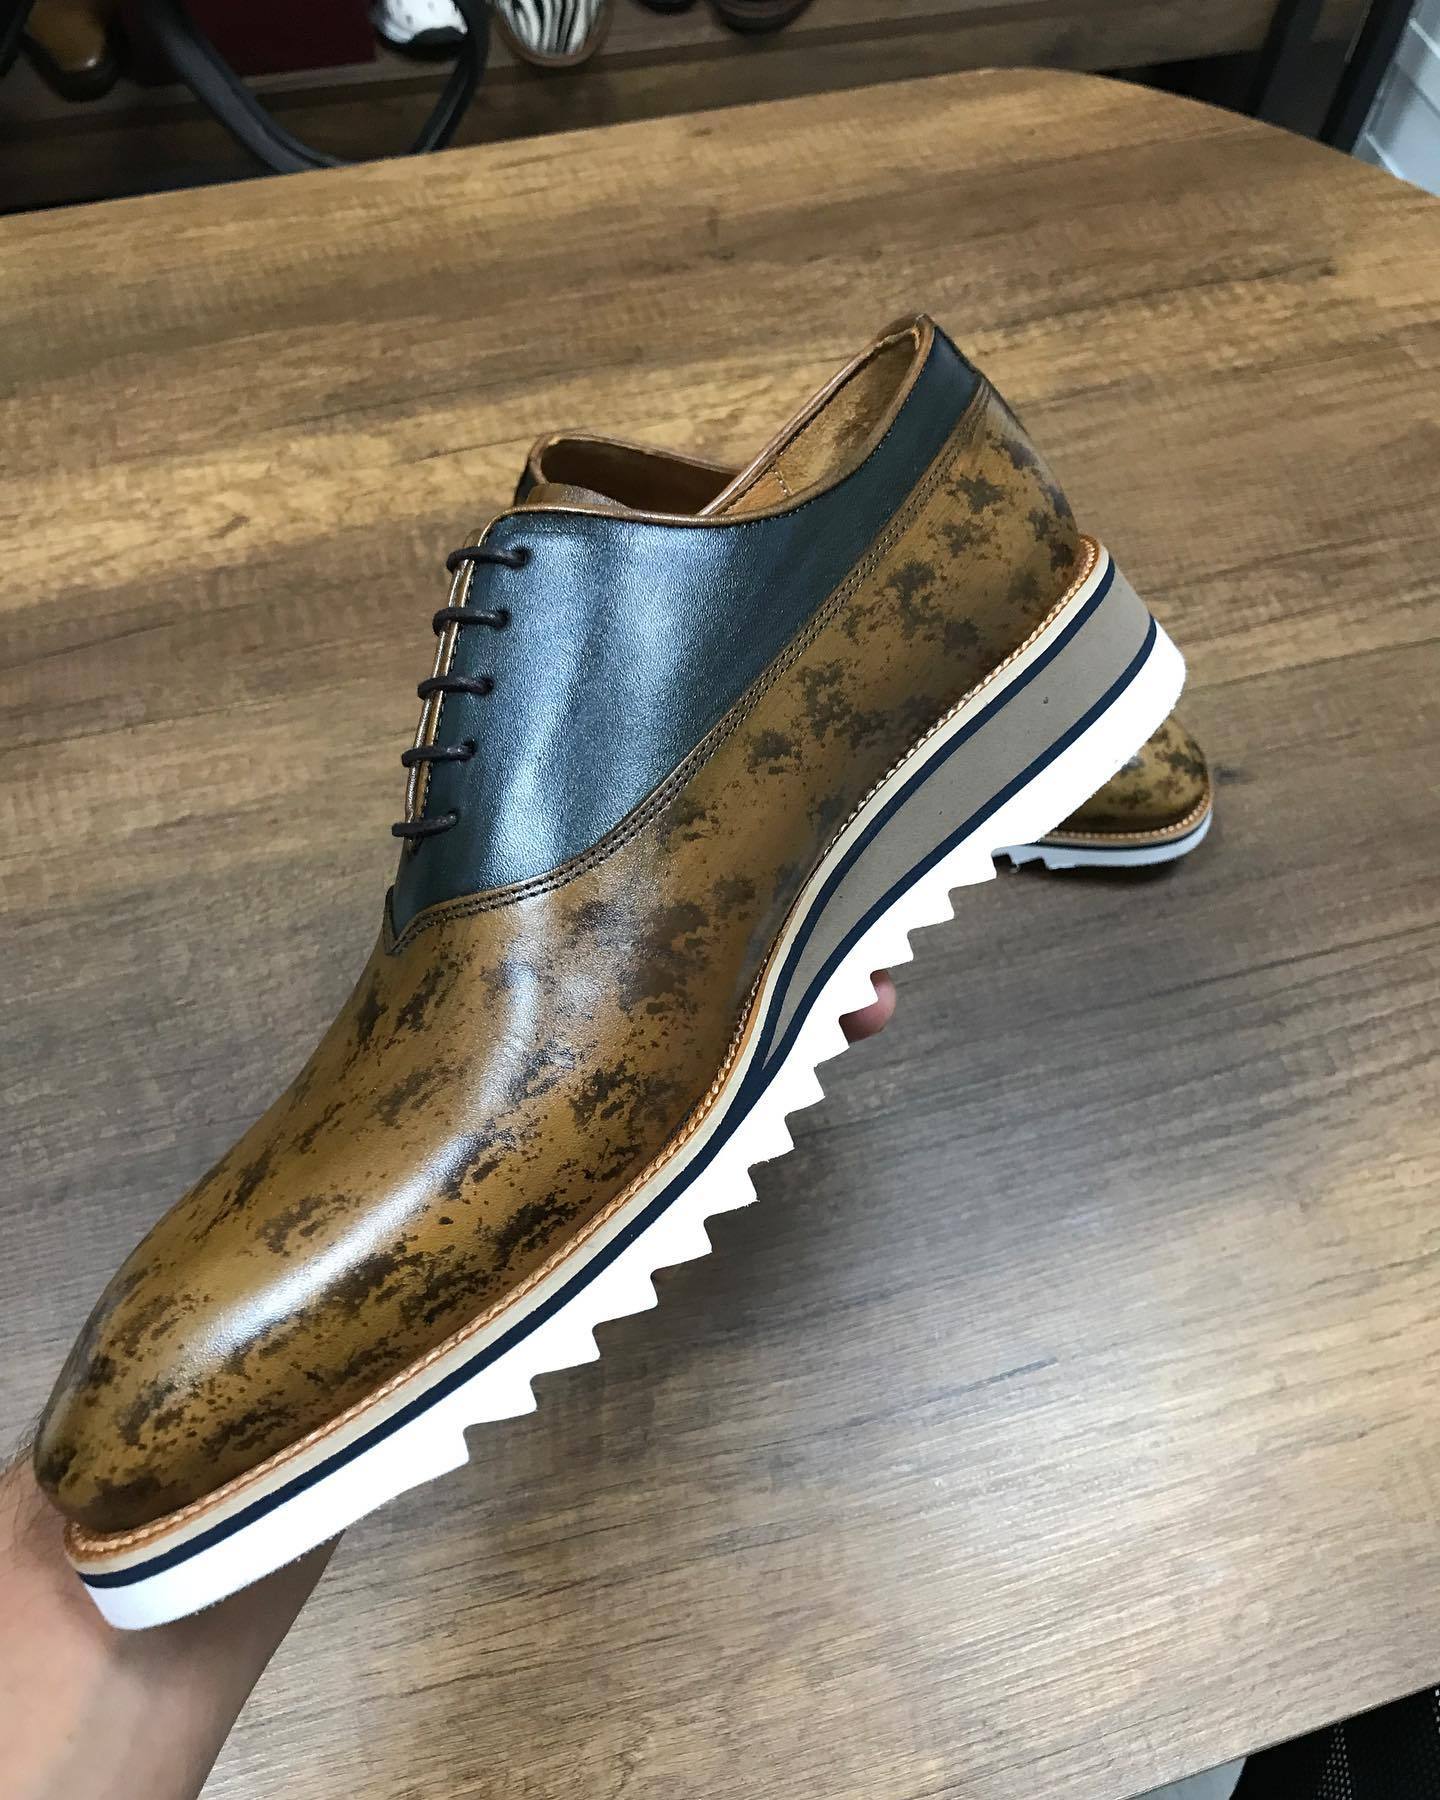 Brown spotted sneakers